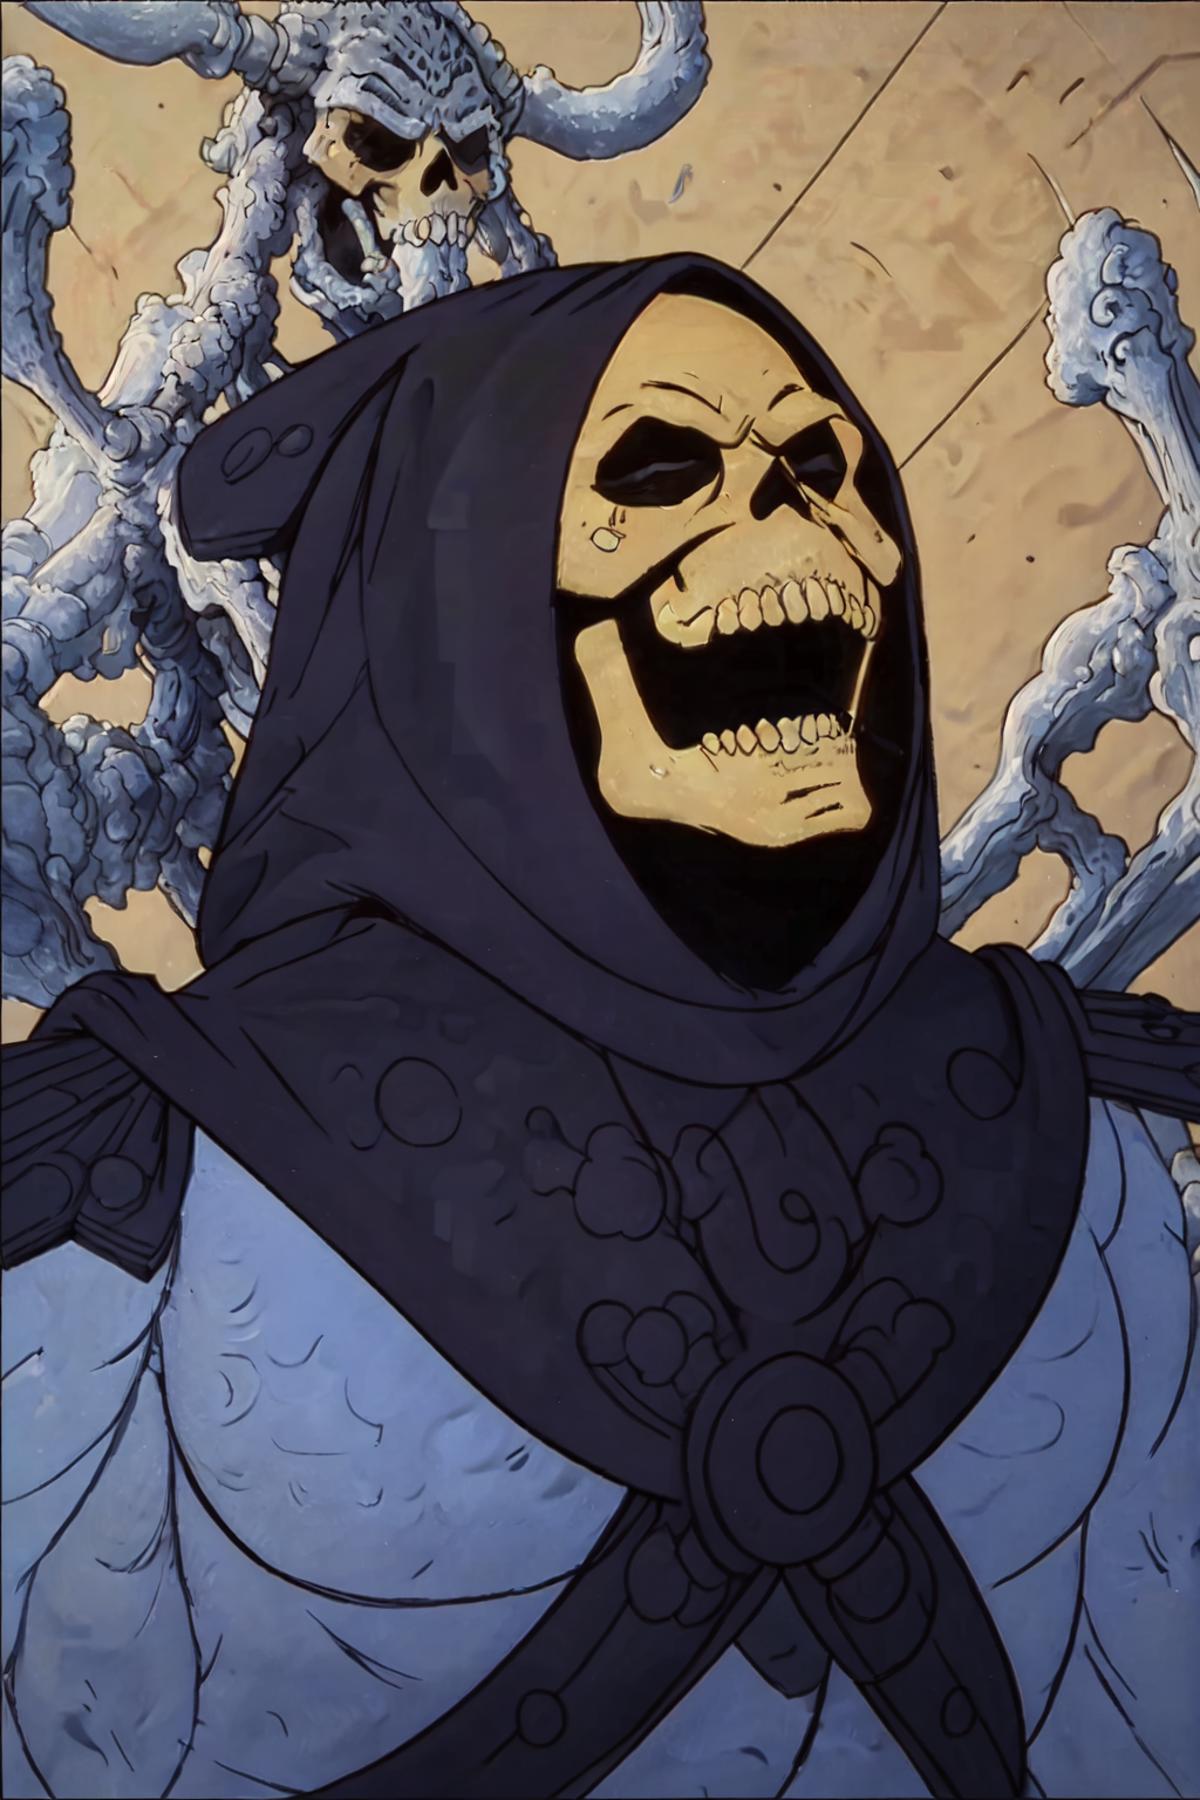 A comic book illustration of a skeleton wearing a hooded cape and laughing.